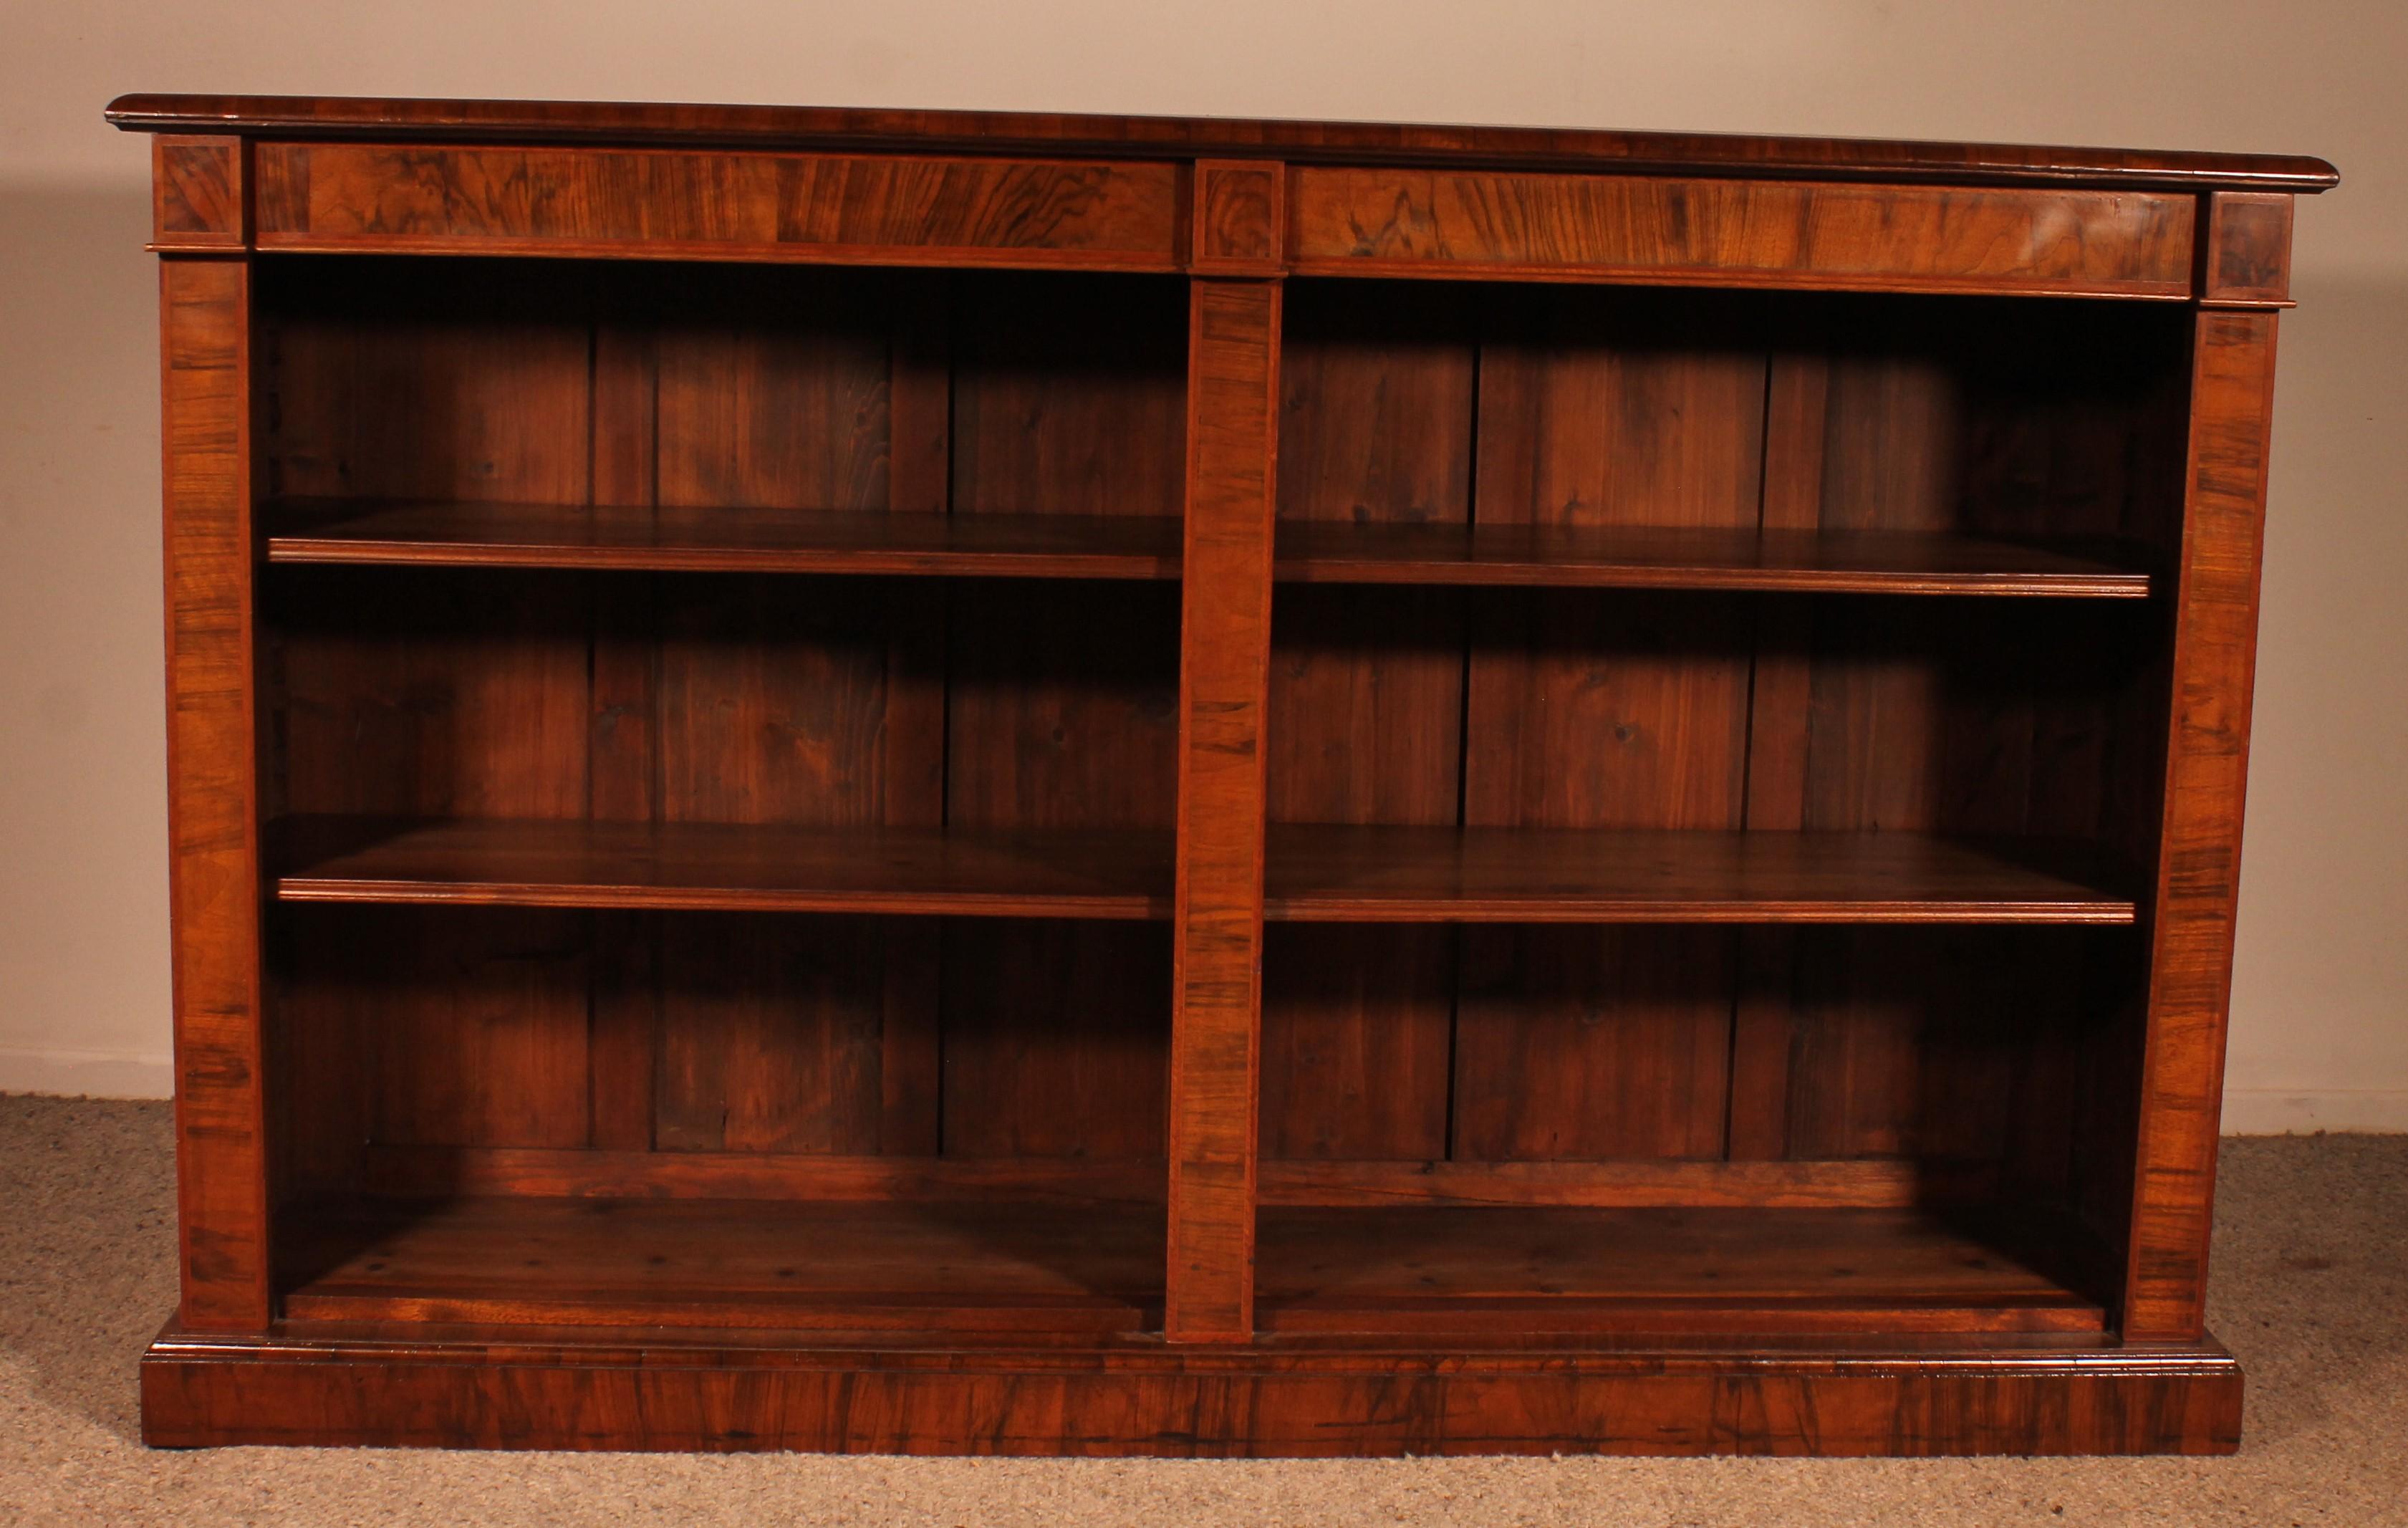 Elegant large open bookcase in walnut from the 19th century from England

rare bookcase by it's size, wood type and quality with a very beautiful work on the front with a walnut with a beautiful flame and inlays on the uprights and the top